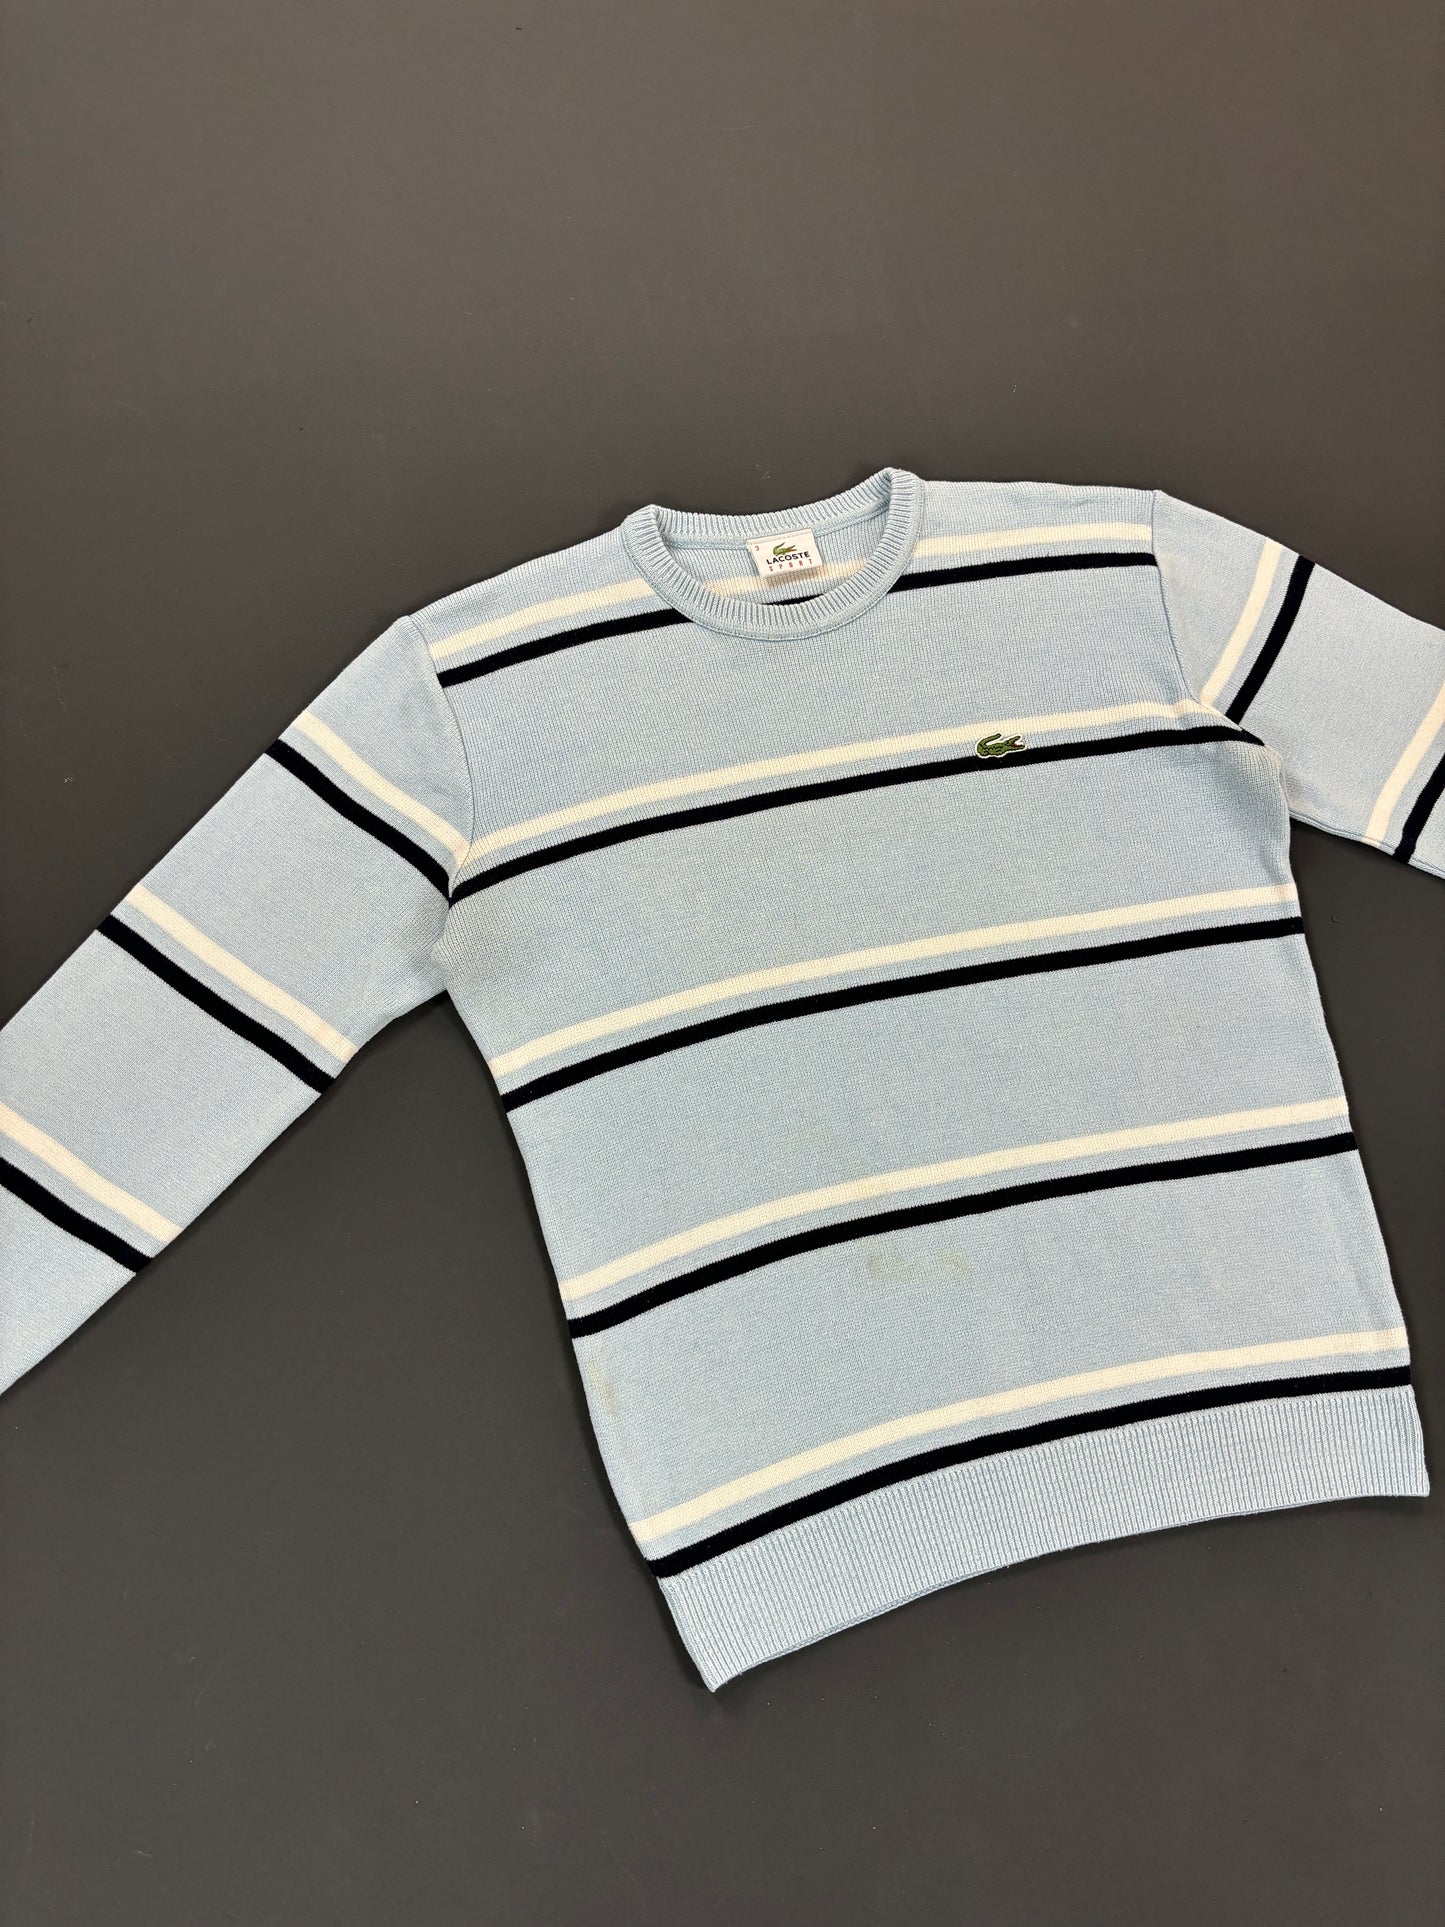 Lacoste Sweater S-M